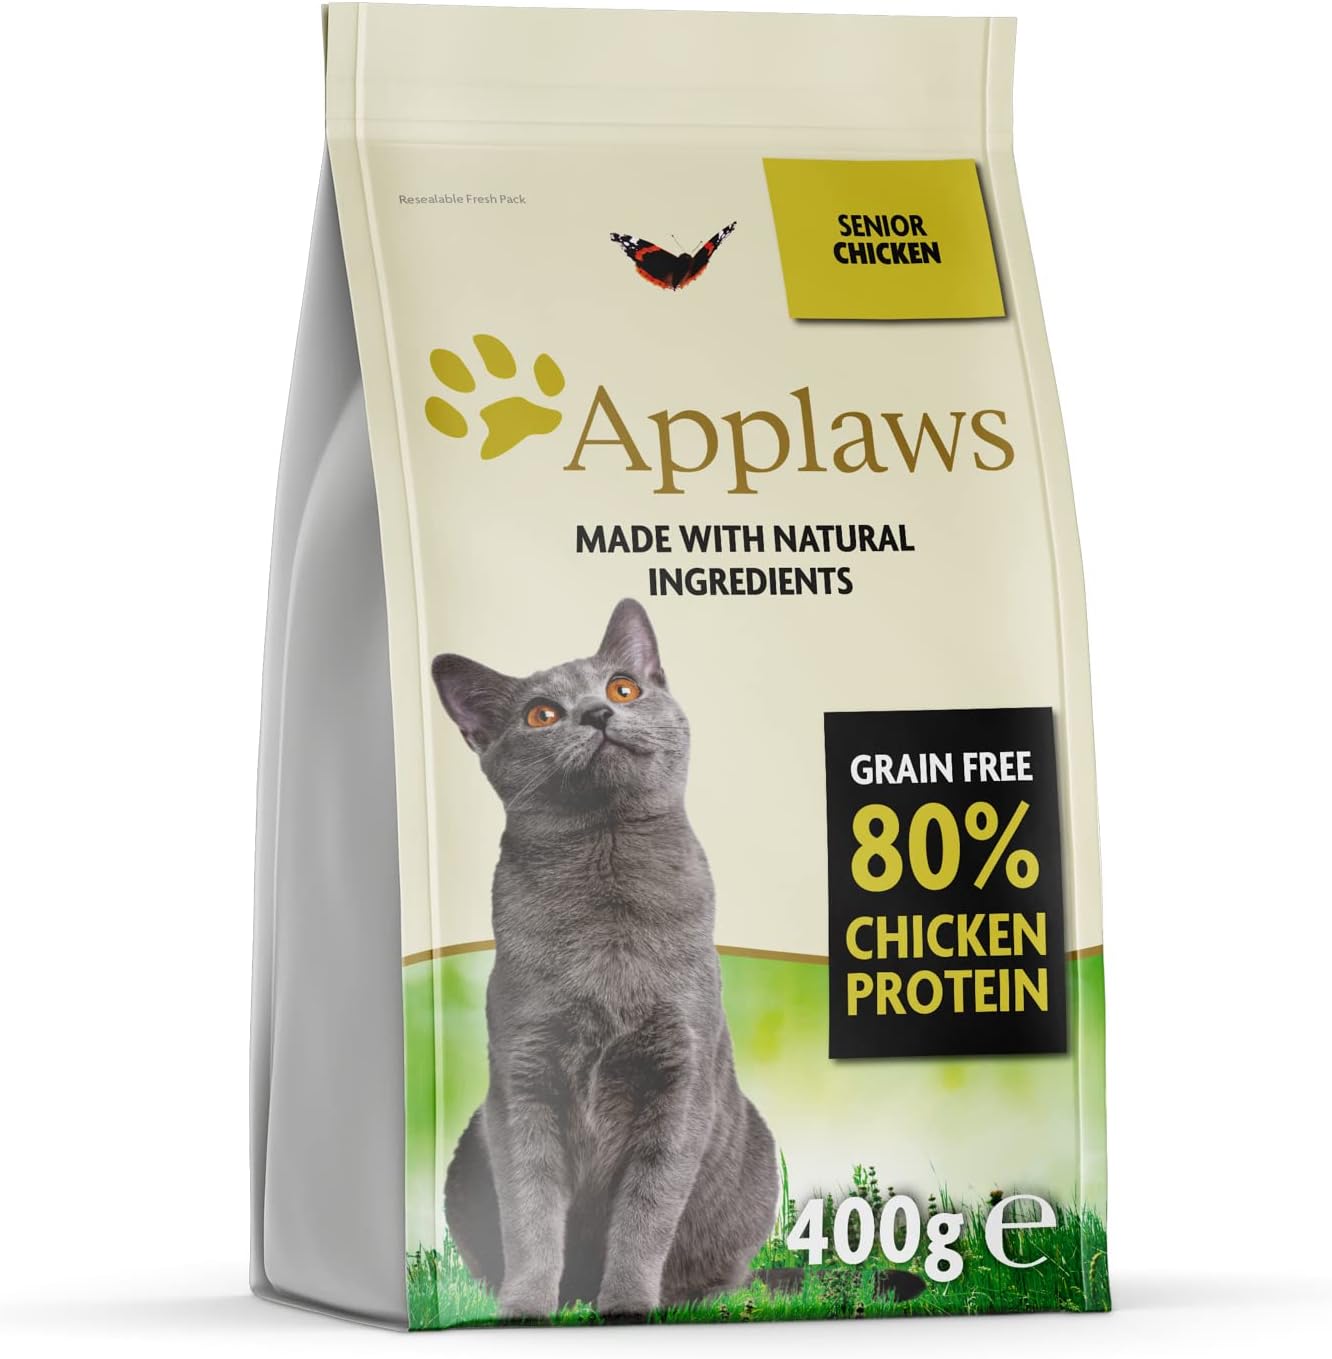 Applaws Complete and Grain Free Adult Senior Dry Cat Food, Chicken, 400g Bag (Pack of 1)?9101414